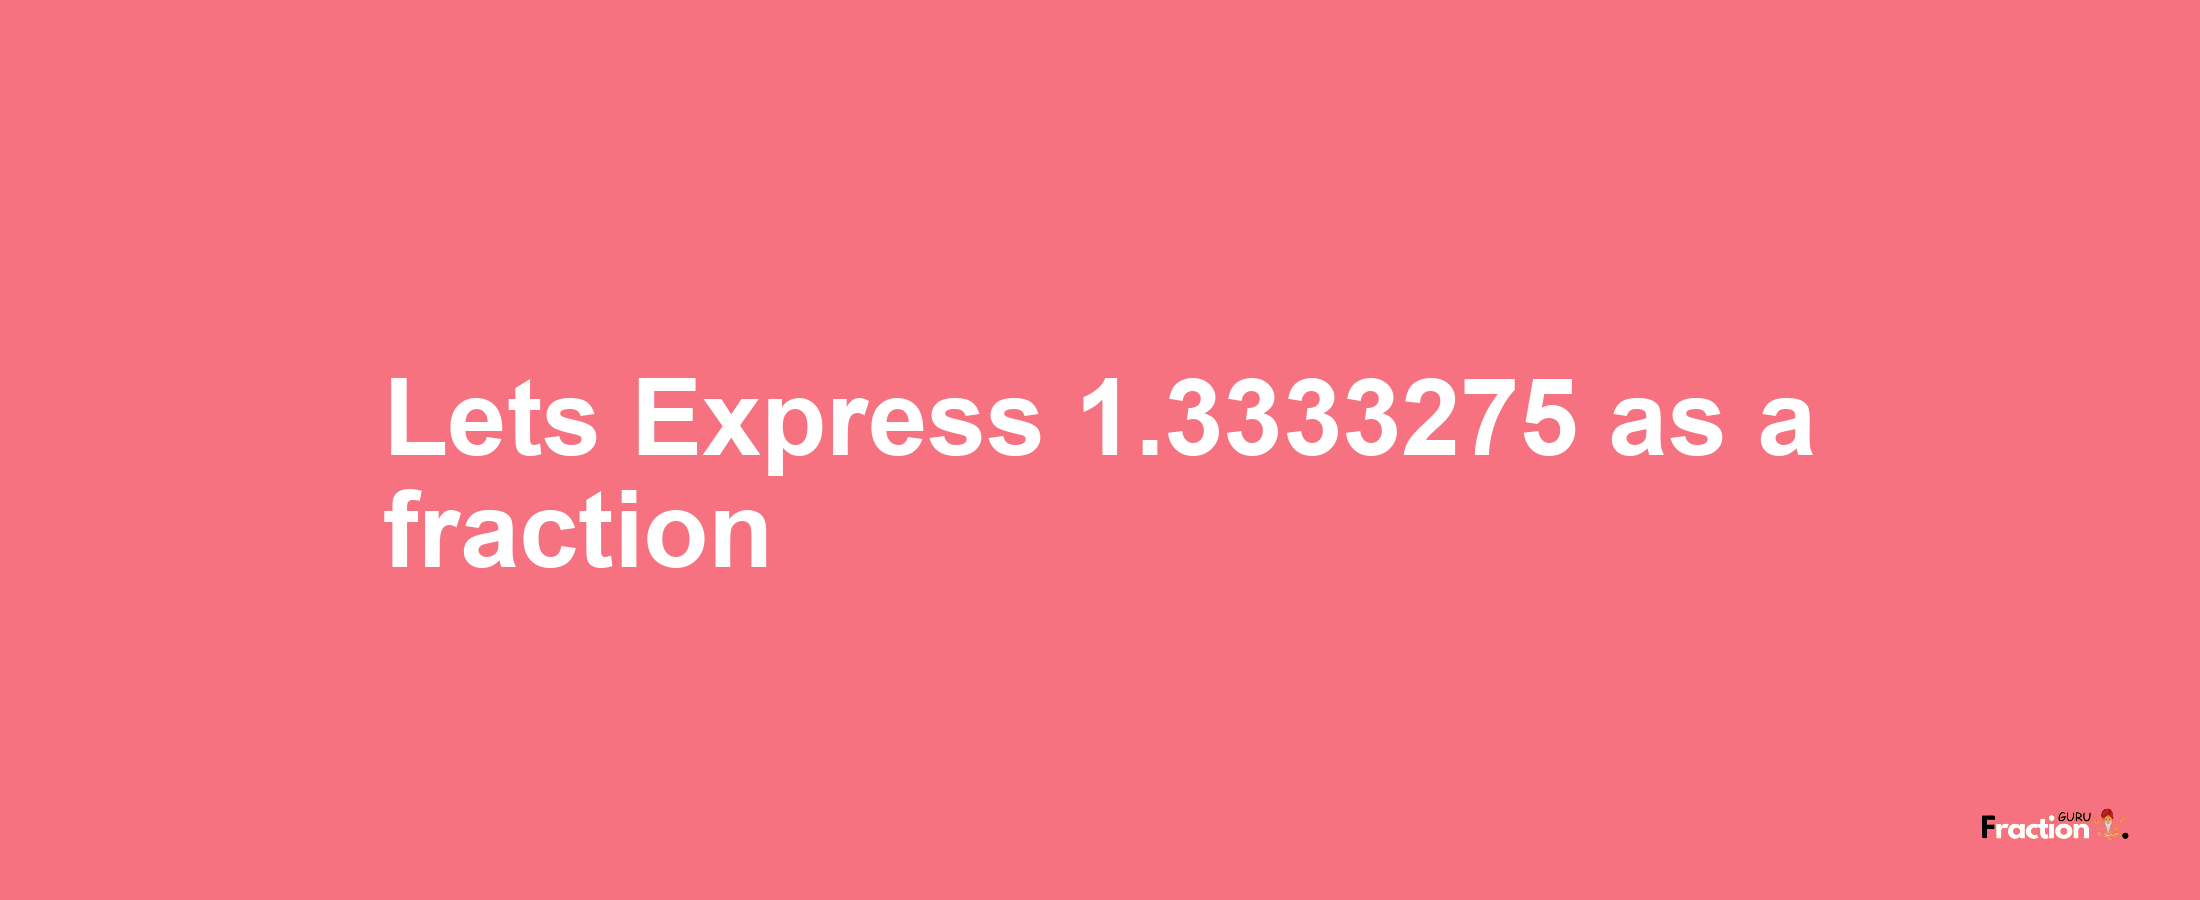 Lets Express 1.3333275 as afraction